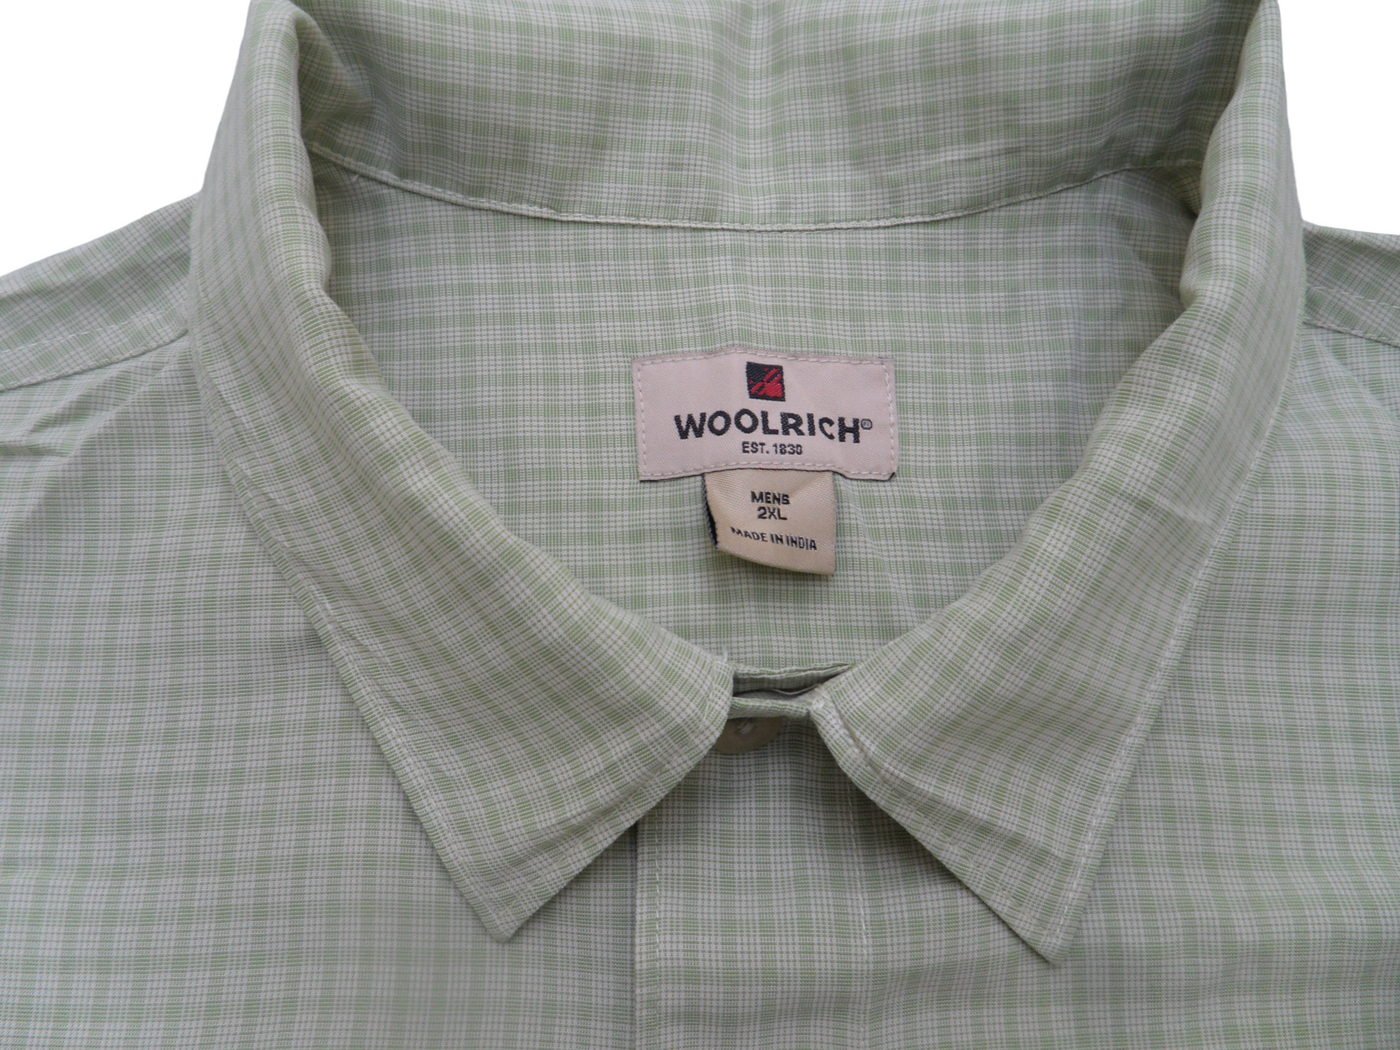 Vintage Woolrich Men's Light Green Checked Polyester Short Sleeve Shirt - XX Large